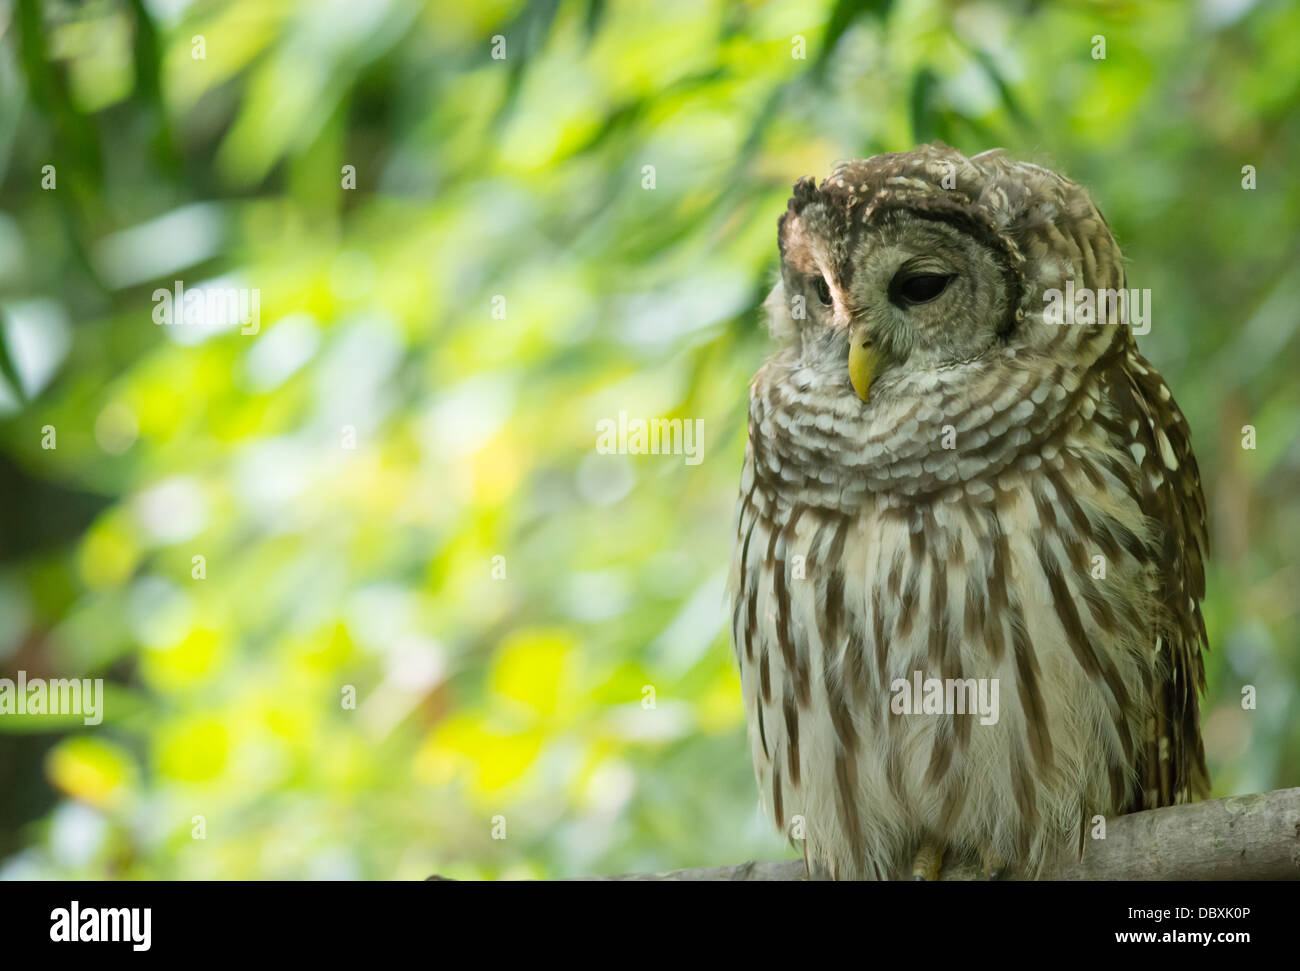 One Of The Resident Barred Owls At The Bog Garden In Greensboro